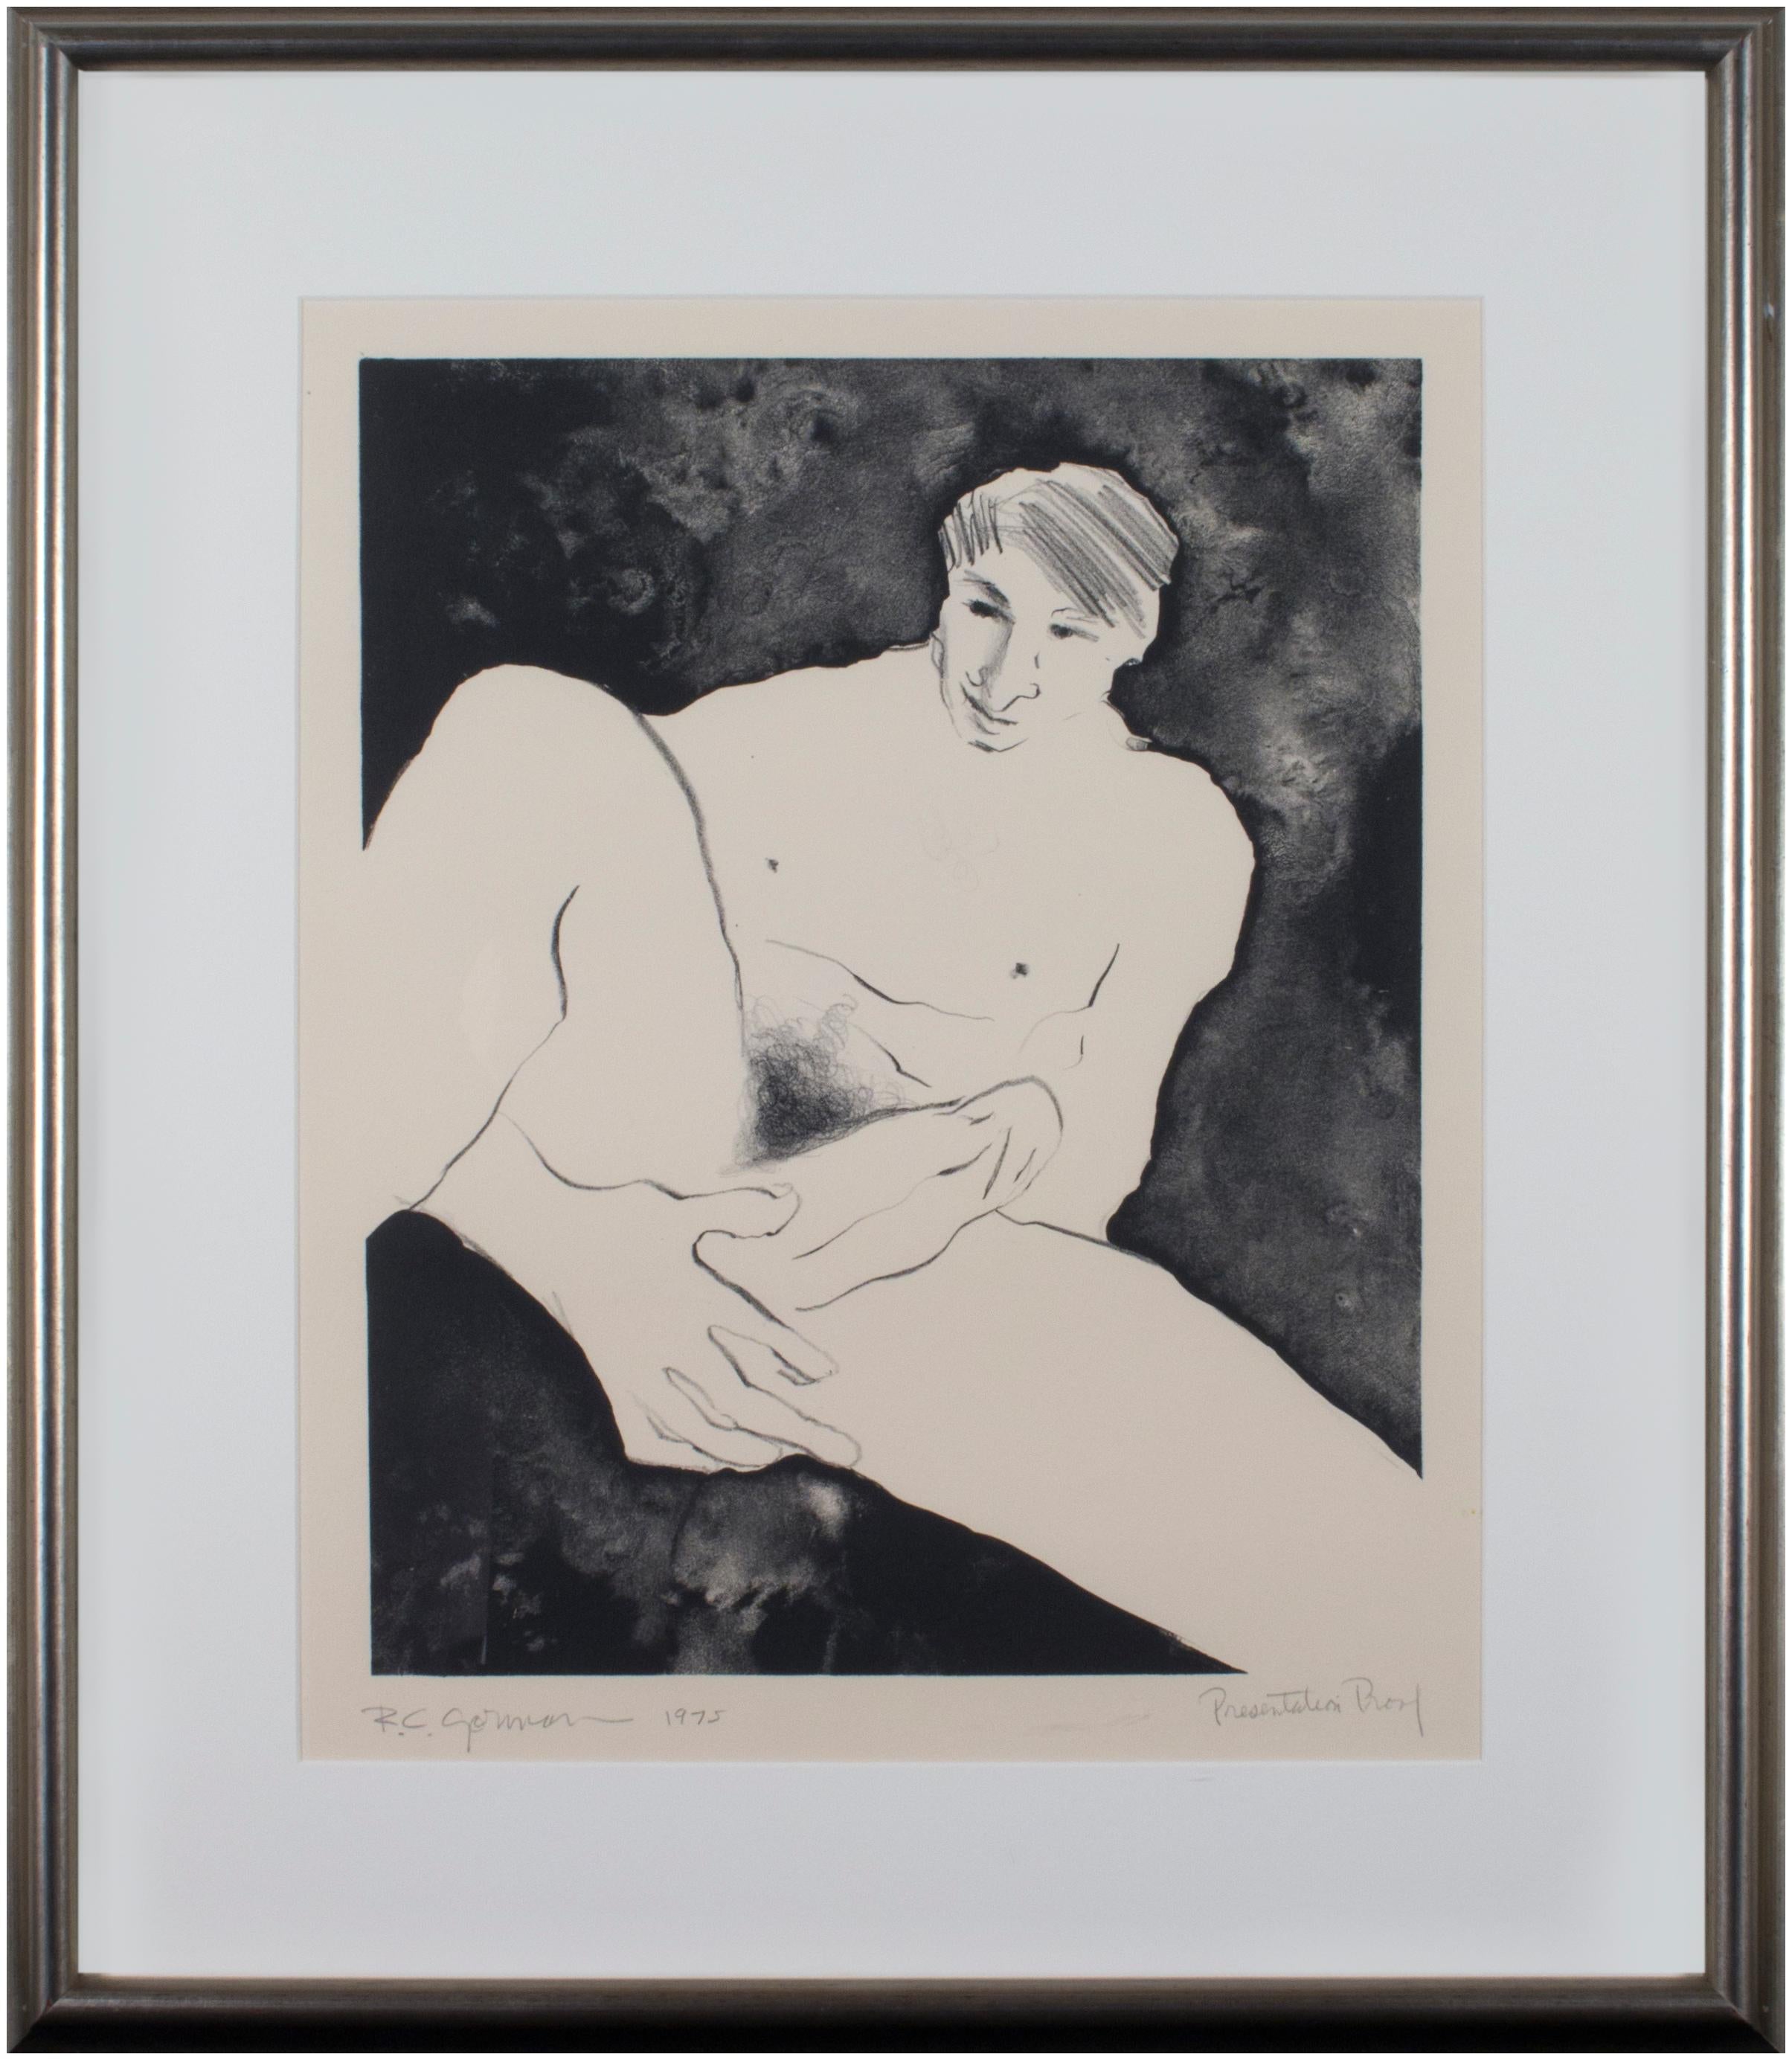 'Nude Male and Nude Female, ' original lithograph pair signed by R.C. Gorman - Contemporary Print by Rudolph Carl Gorman